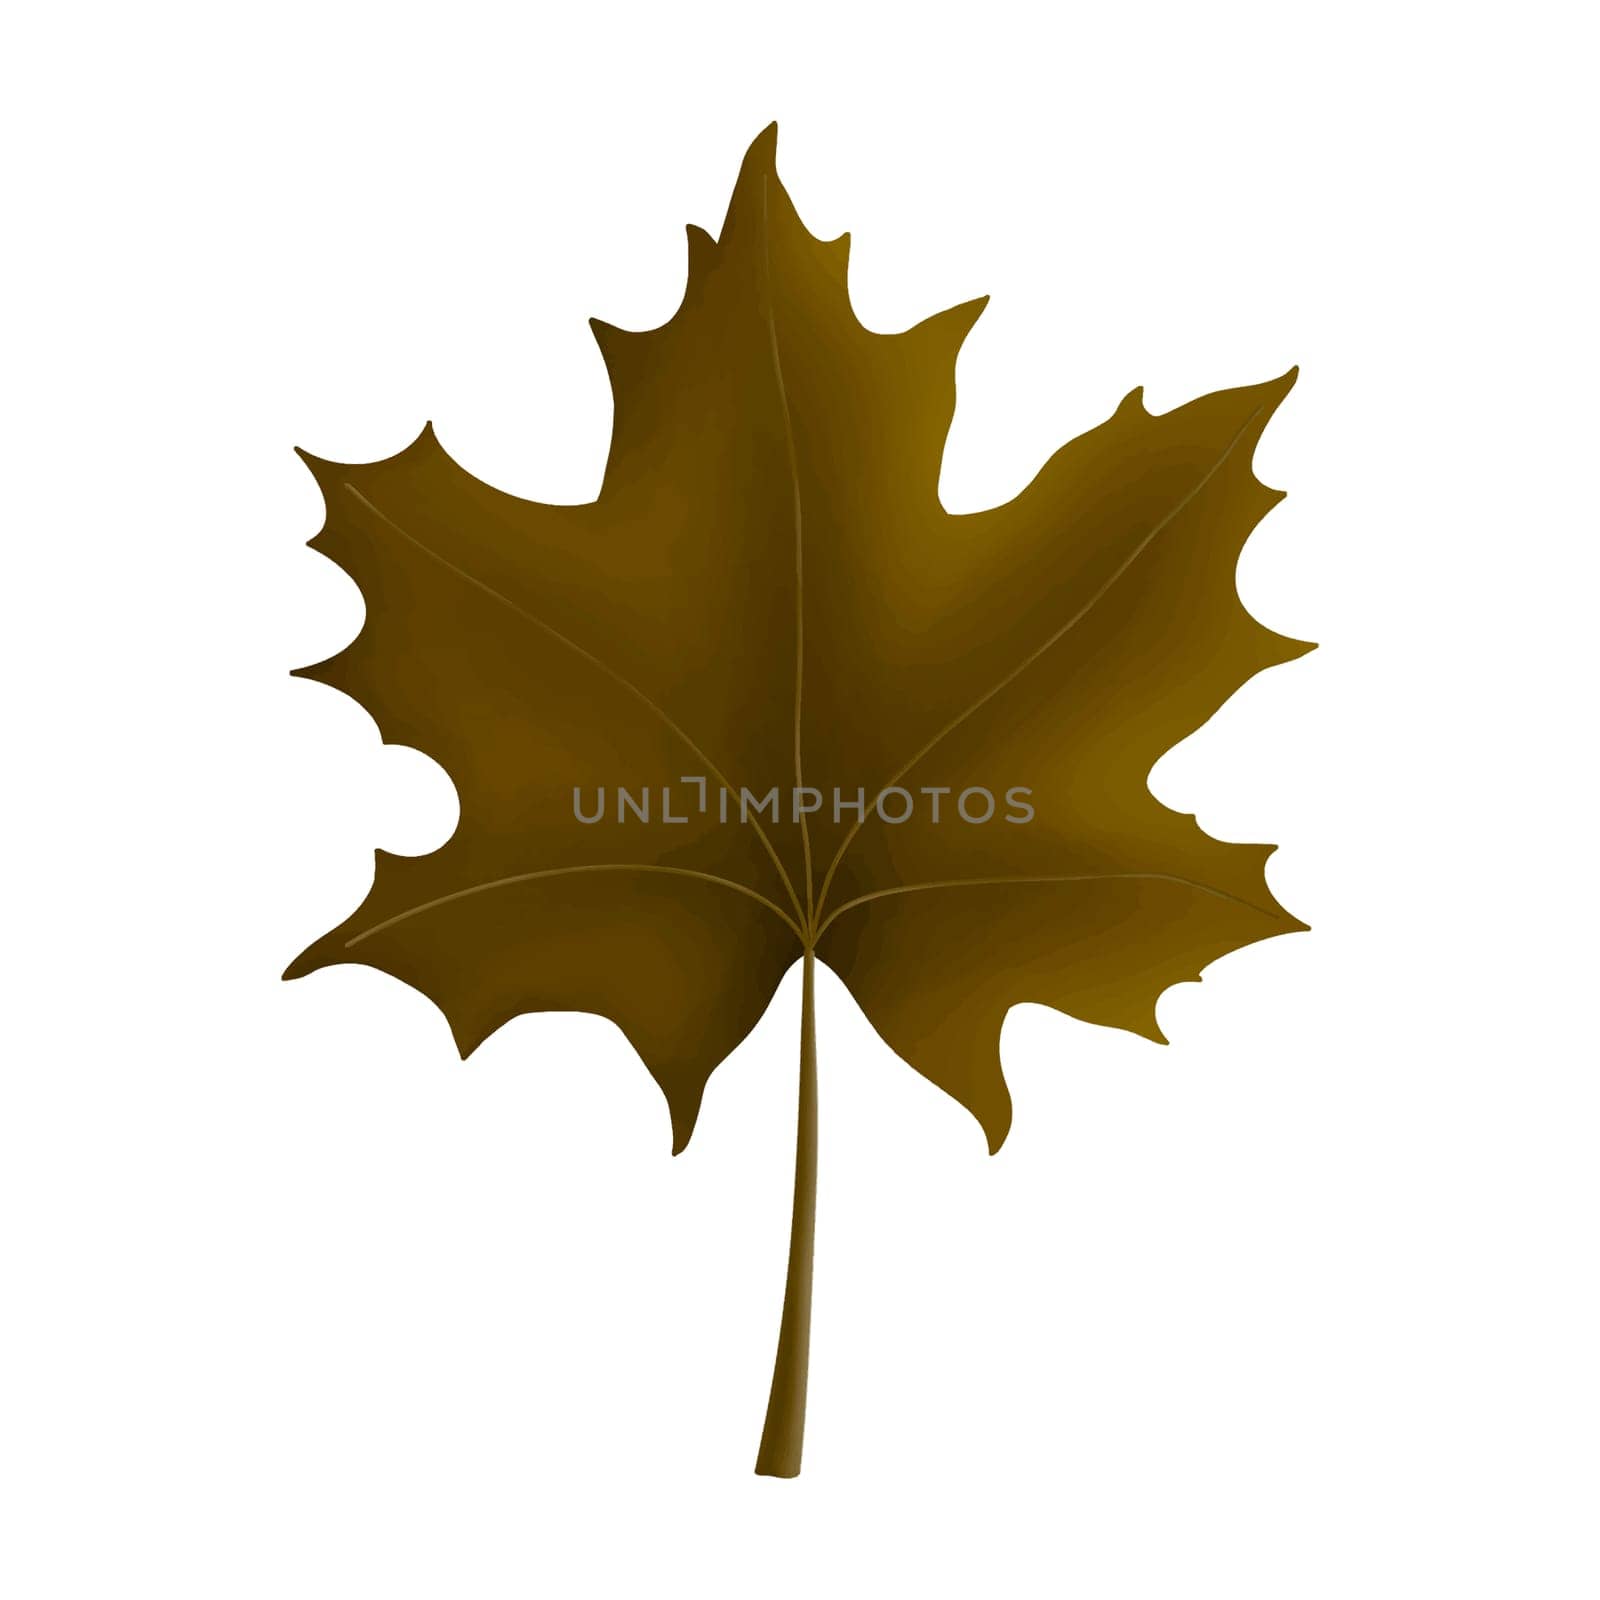 Autumn Maple Leaf Isolated Clipart. Maple Leaves design element isolated on white background for pattern, decoration, planner sticker, sublimation and more.